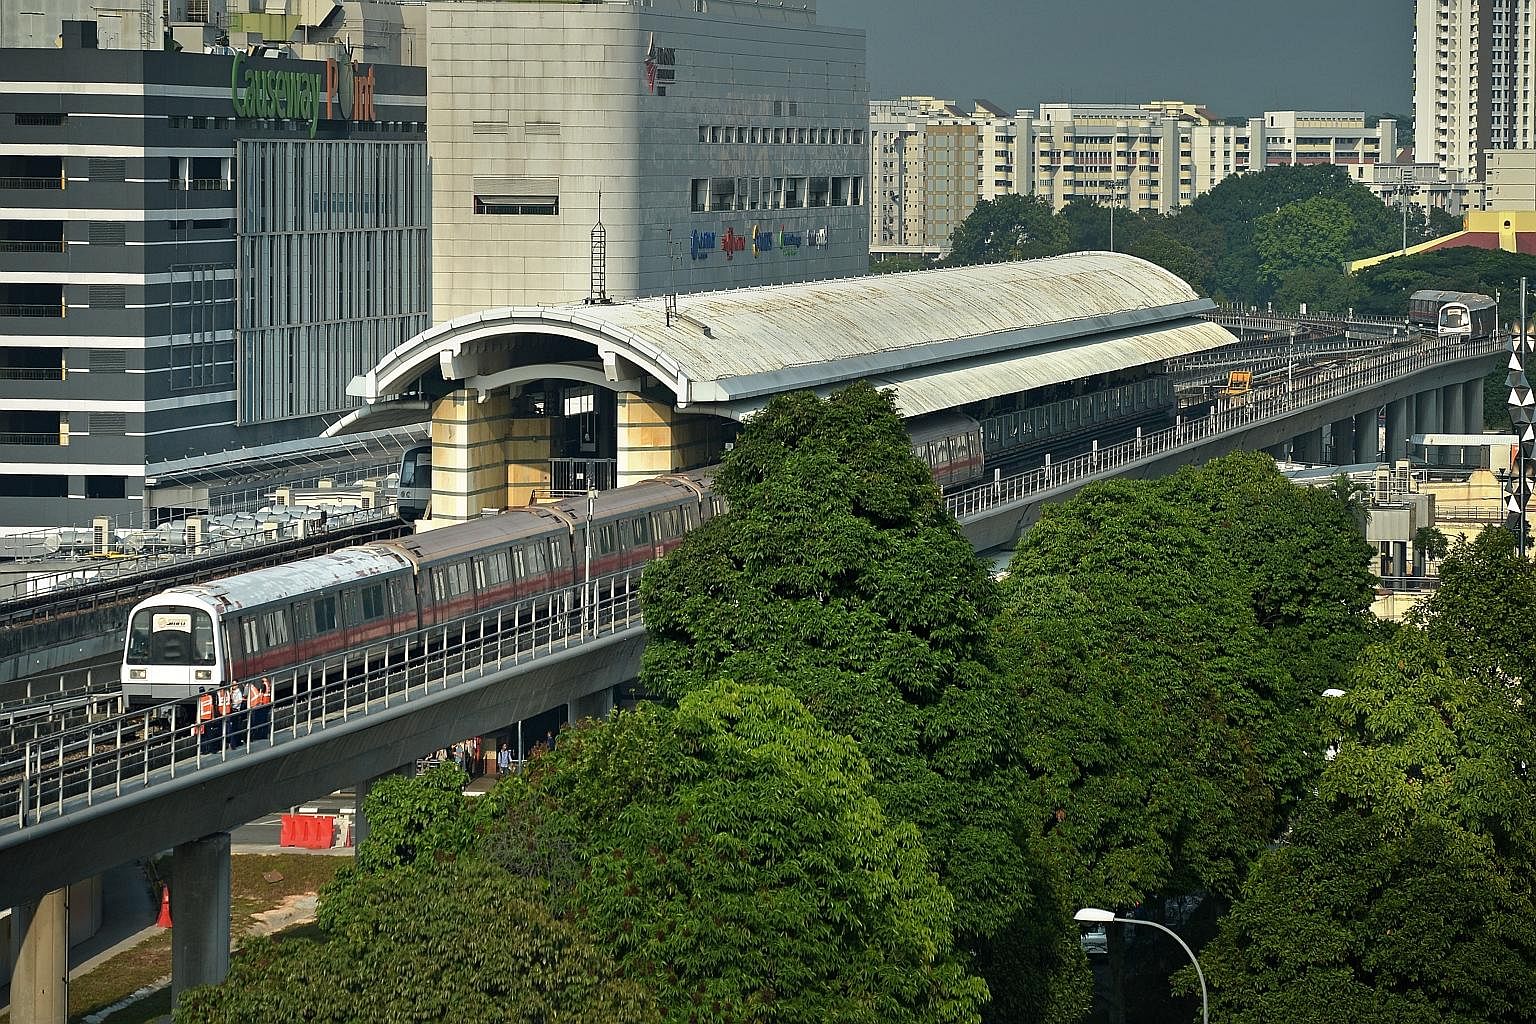 While tremendous effort has been put into making Singapore more progressive, "smarter", more liveable and more sustainable, the country's well-being and development could well be set back if its infrastructure systems - including transportation - wer